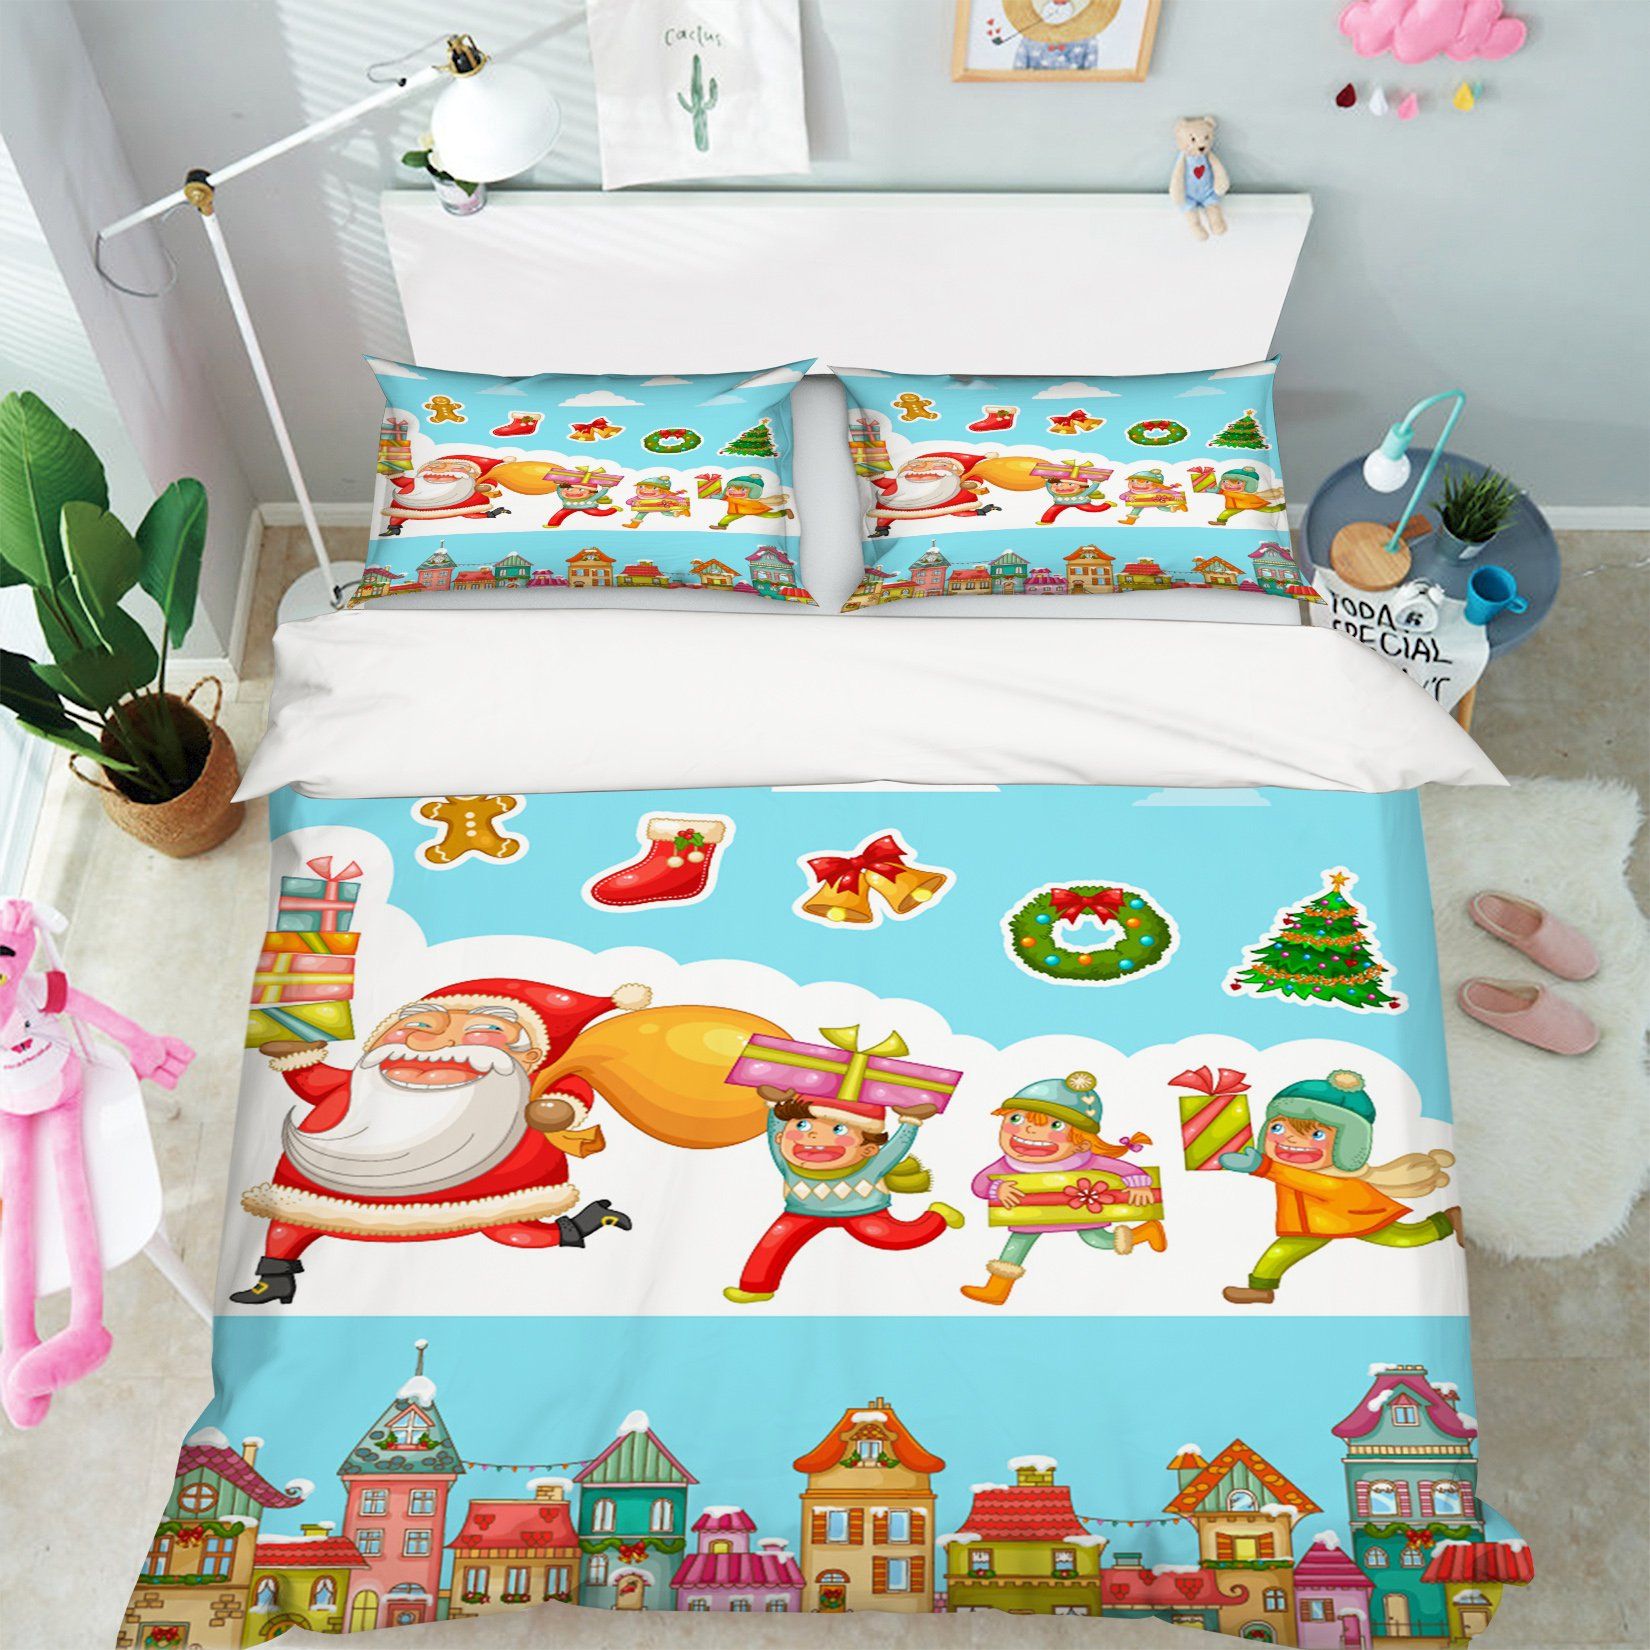 3D Christmas White Beard Gift 28 Bed Pillowcases Quilt Quiet Covers AJ Creativity Home 